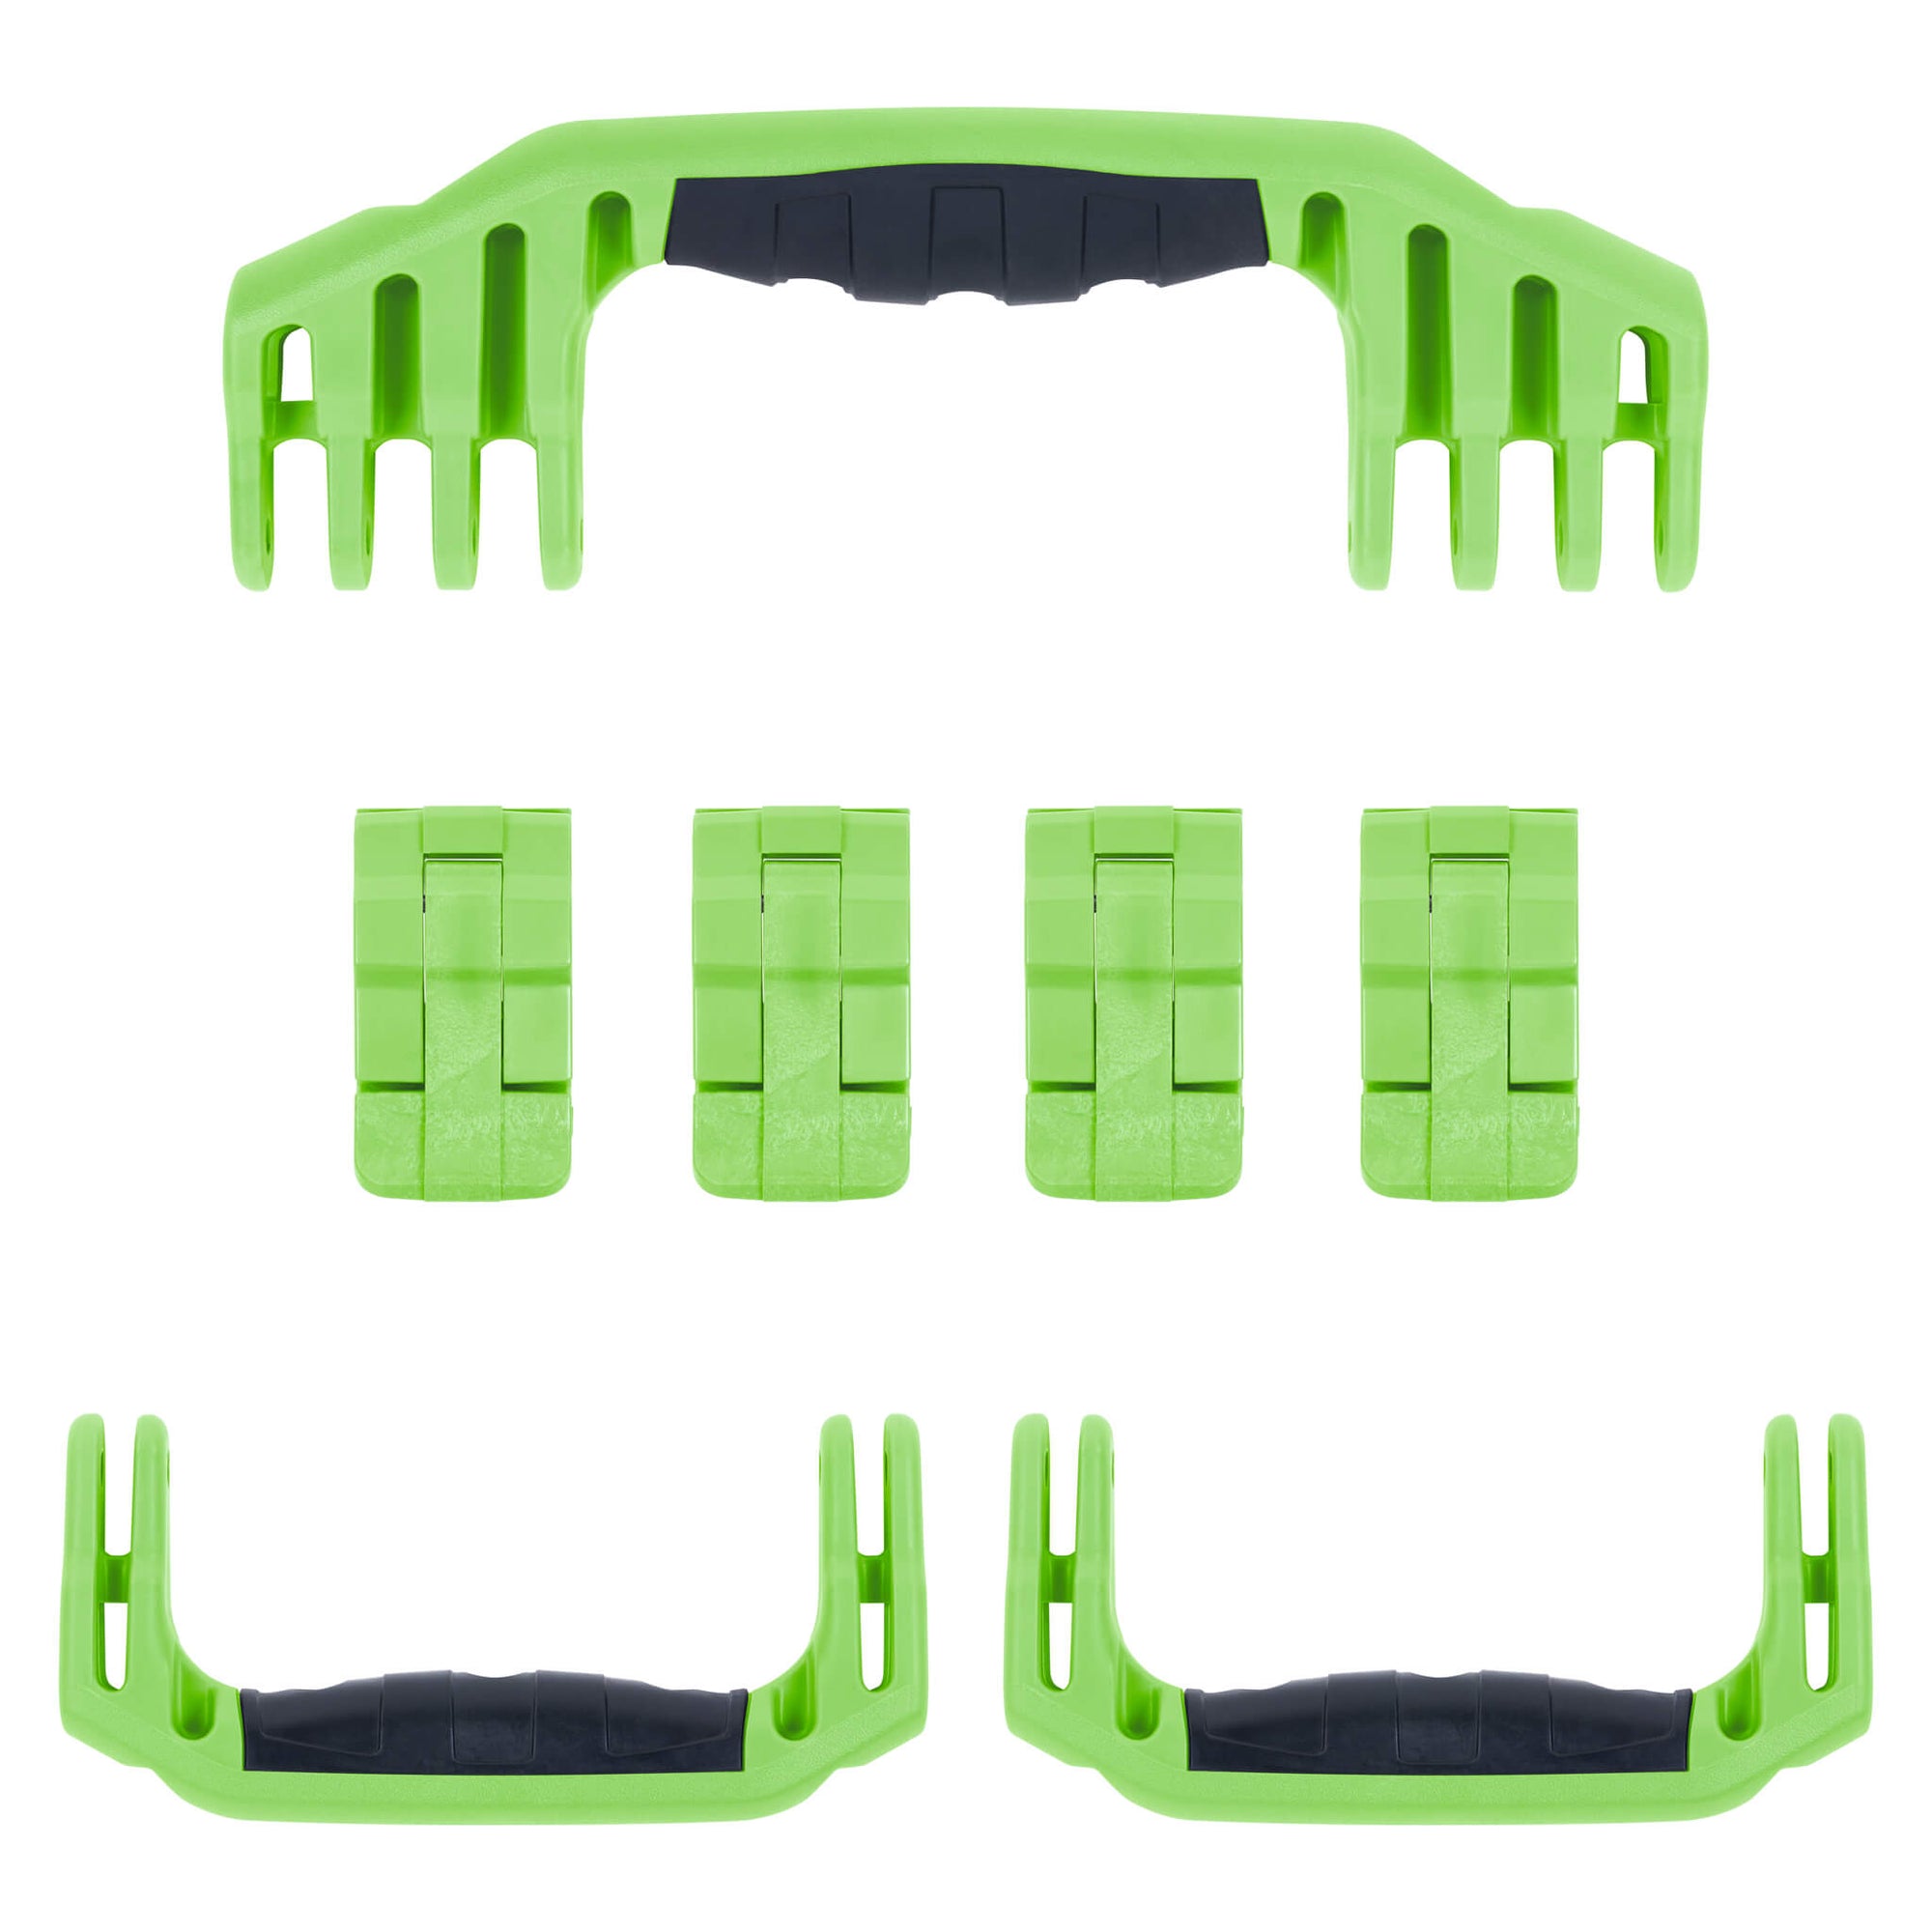 Pelican 1610 Replacement Handles & Latches, Lime Green (Set of 3 Handles, 4 Latches) ColorCase 